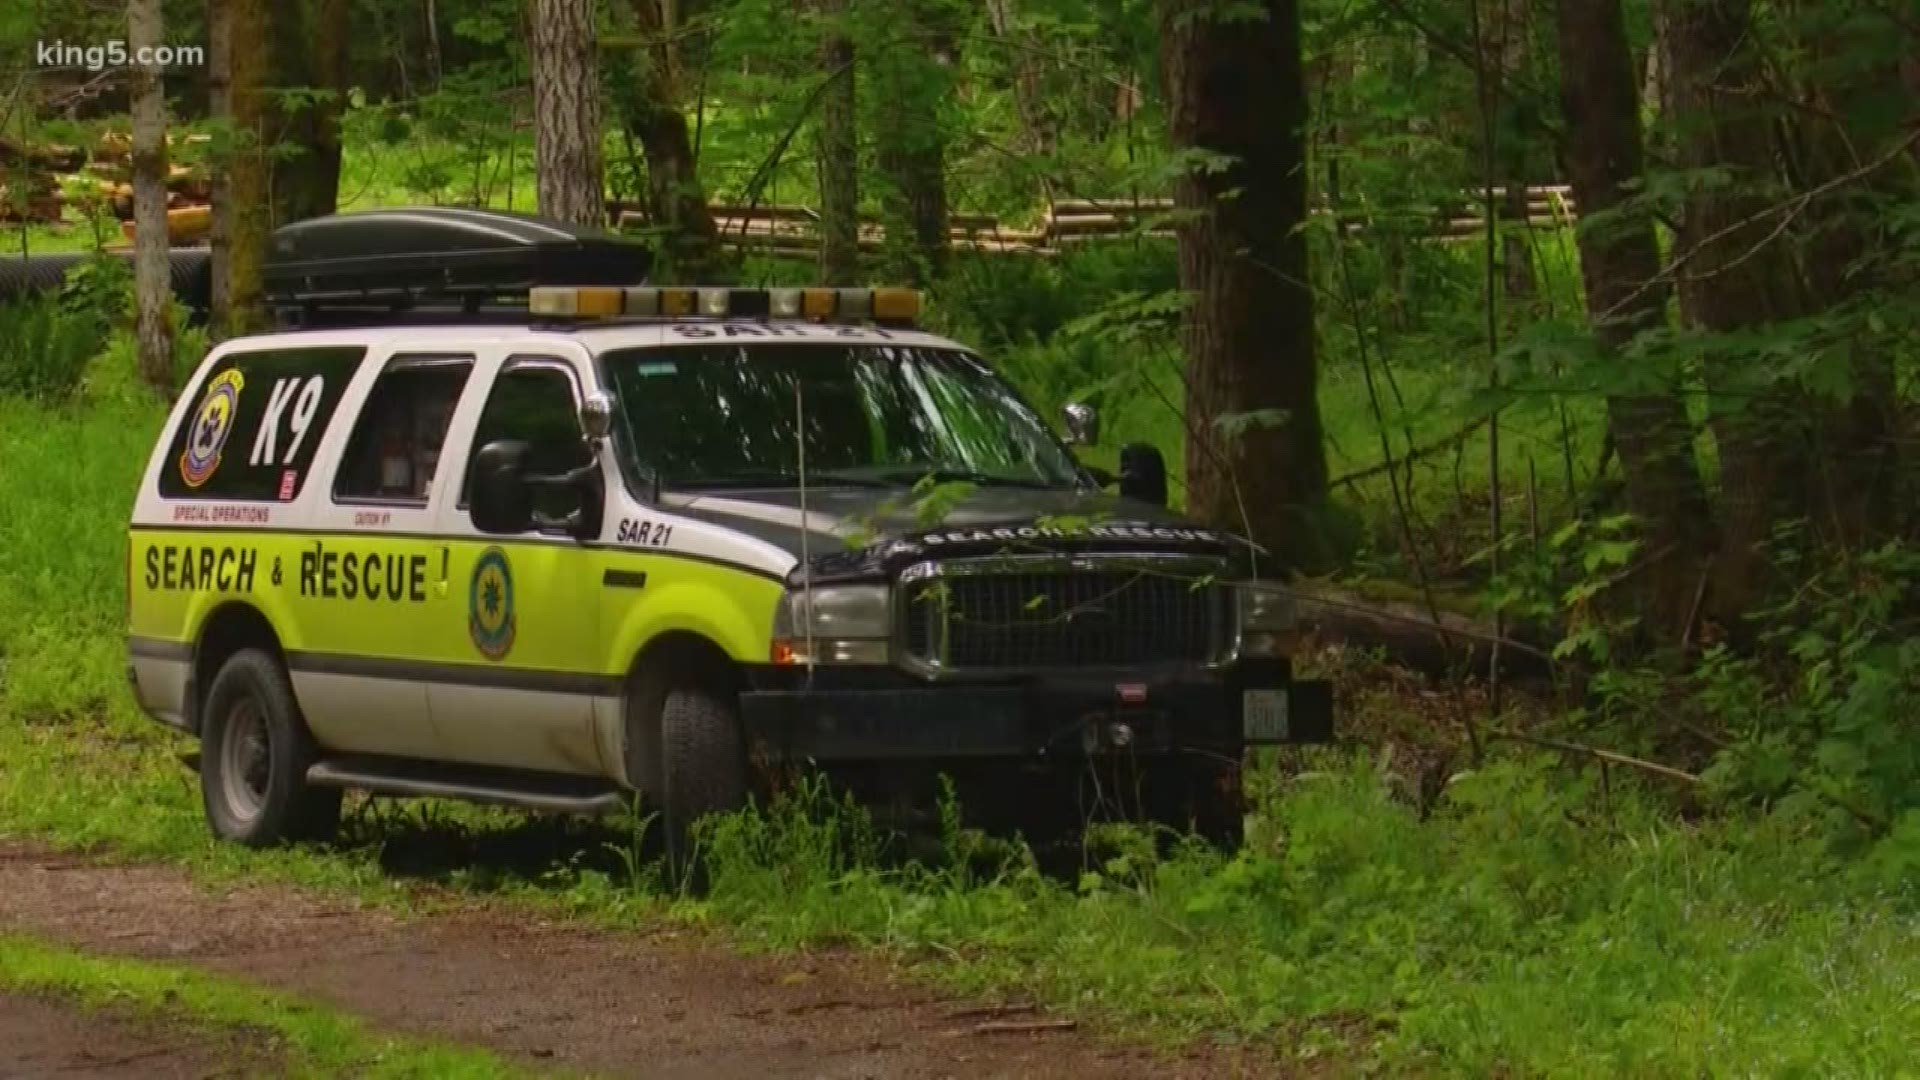 A 7-year-old girl is safe after she went missing from a campground in Newhalem, Washington, according to the Whatcom County Sheriff's Office. KING 5's Kalie Greenberg reports.